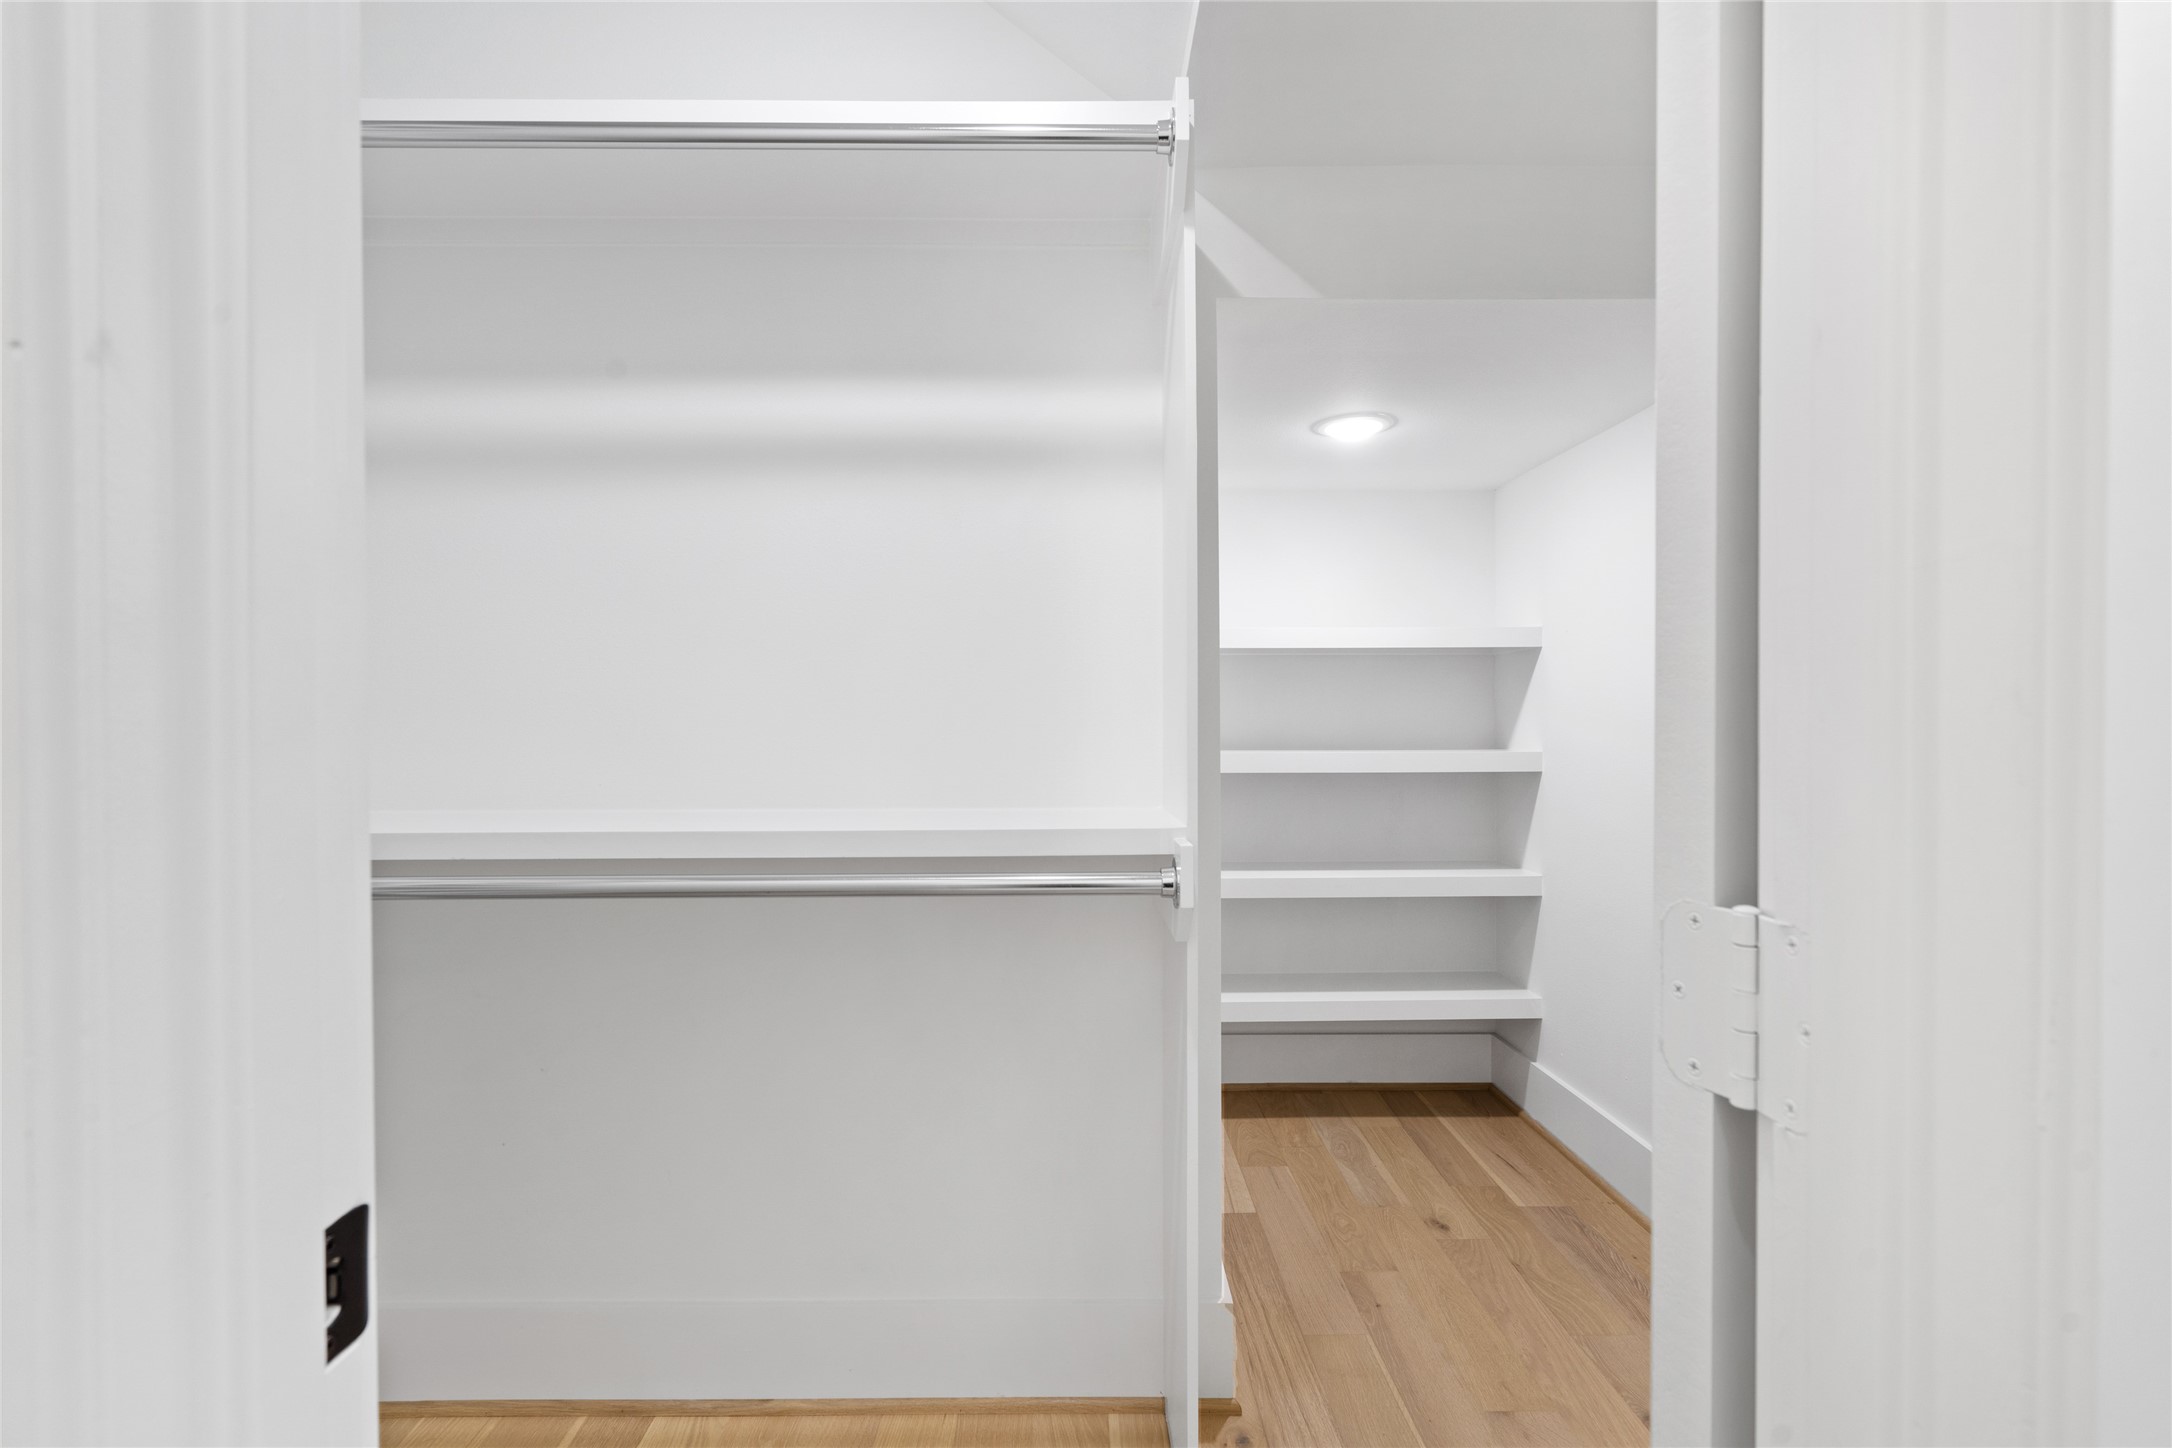 Amazing storage for both the bedroom and overflow underneath the stairs, which wraps around the corner on the right.